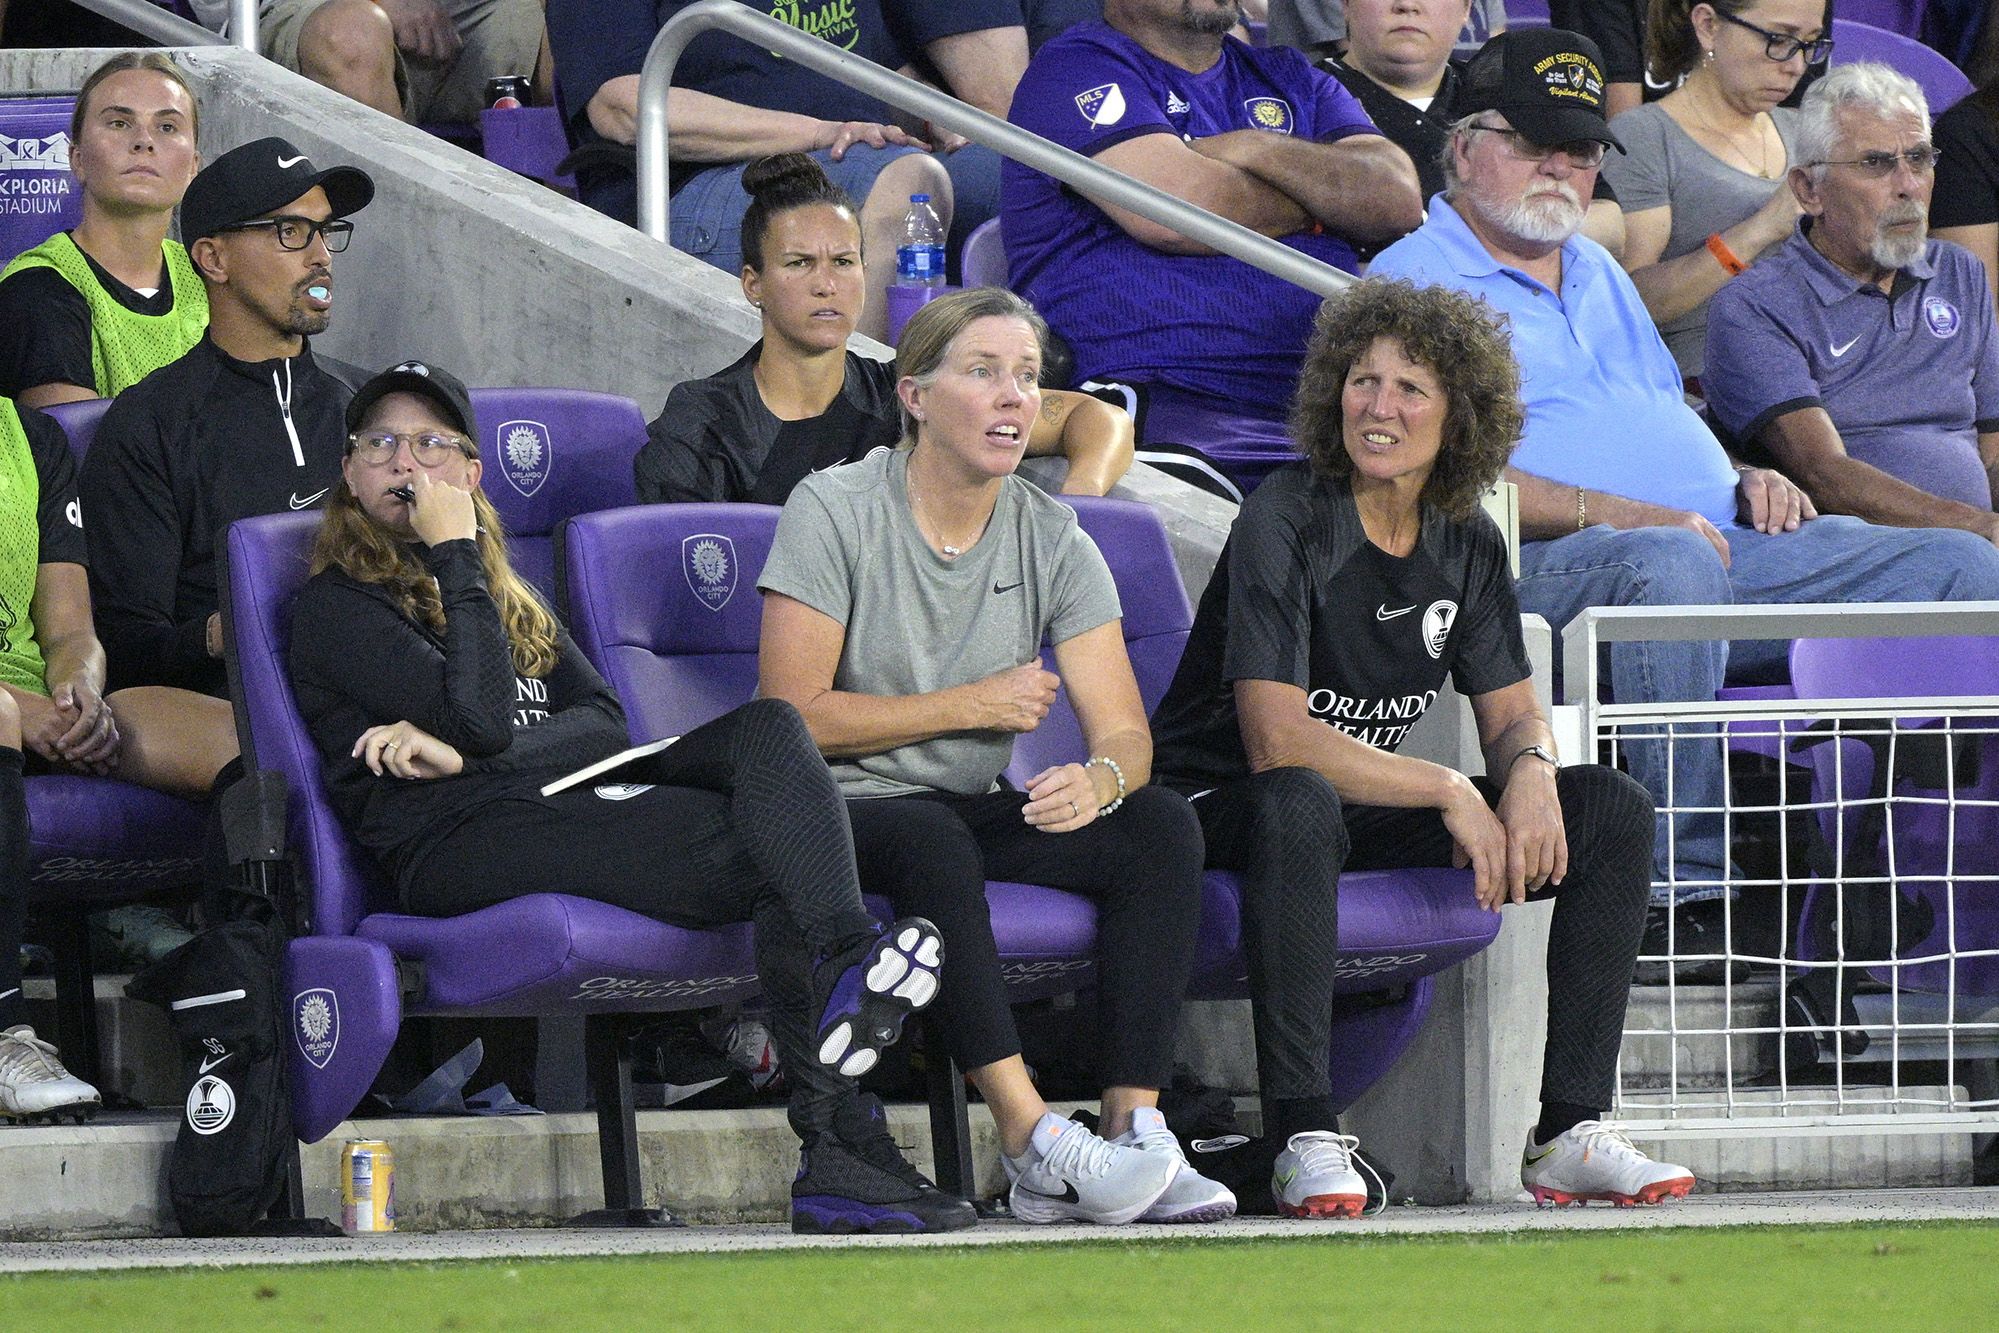 Orlando Pride head coach and assistant coach fired after investigation into  alleged misconduct | CNN